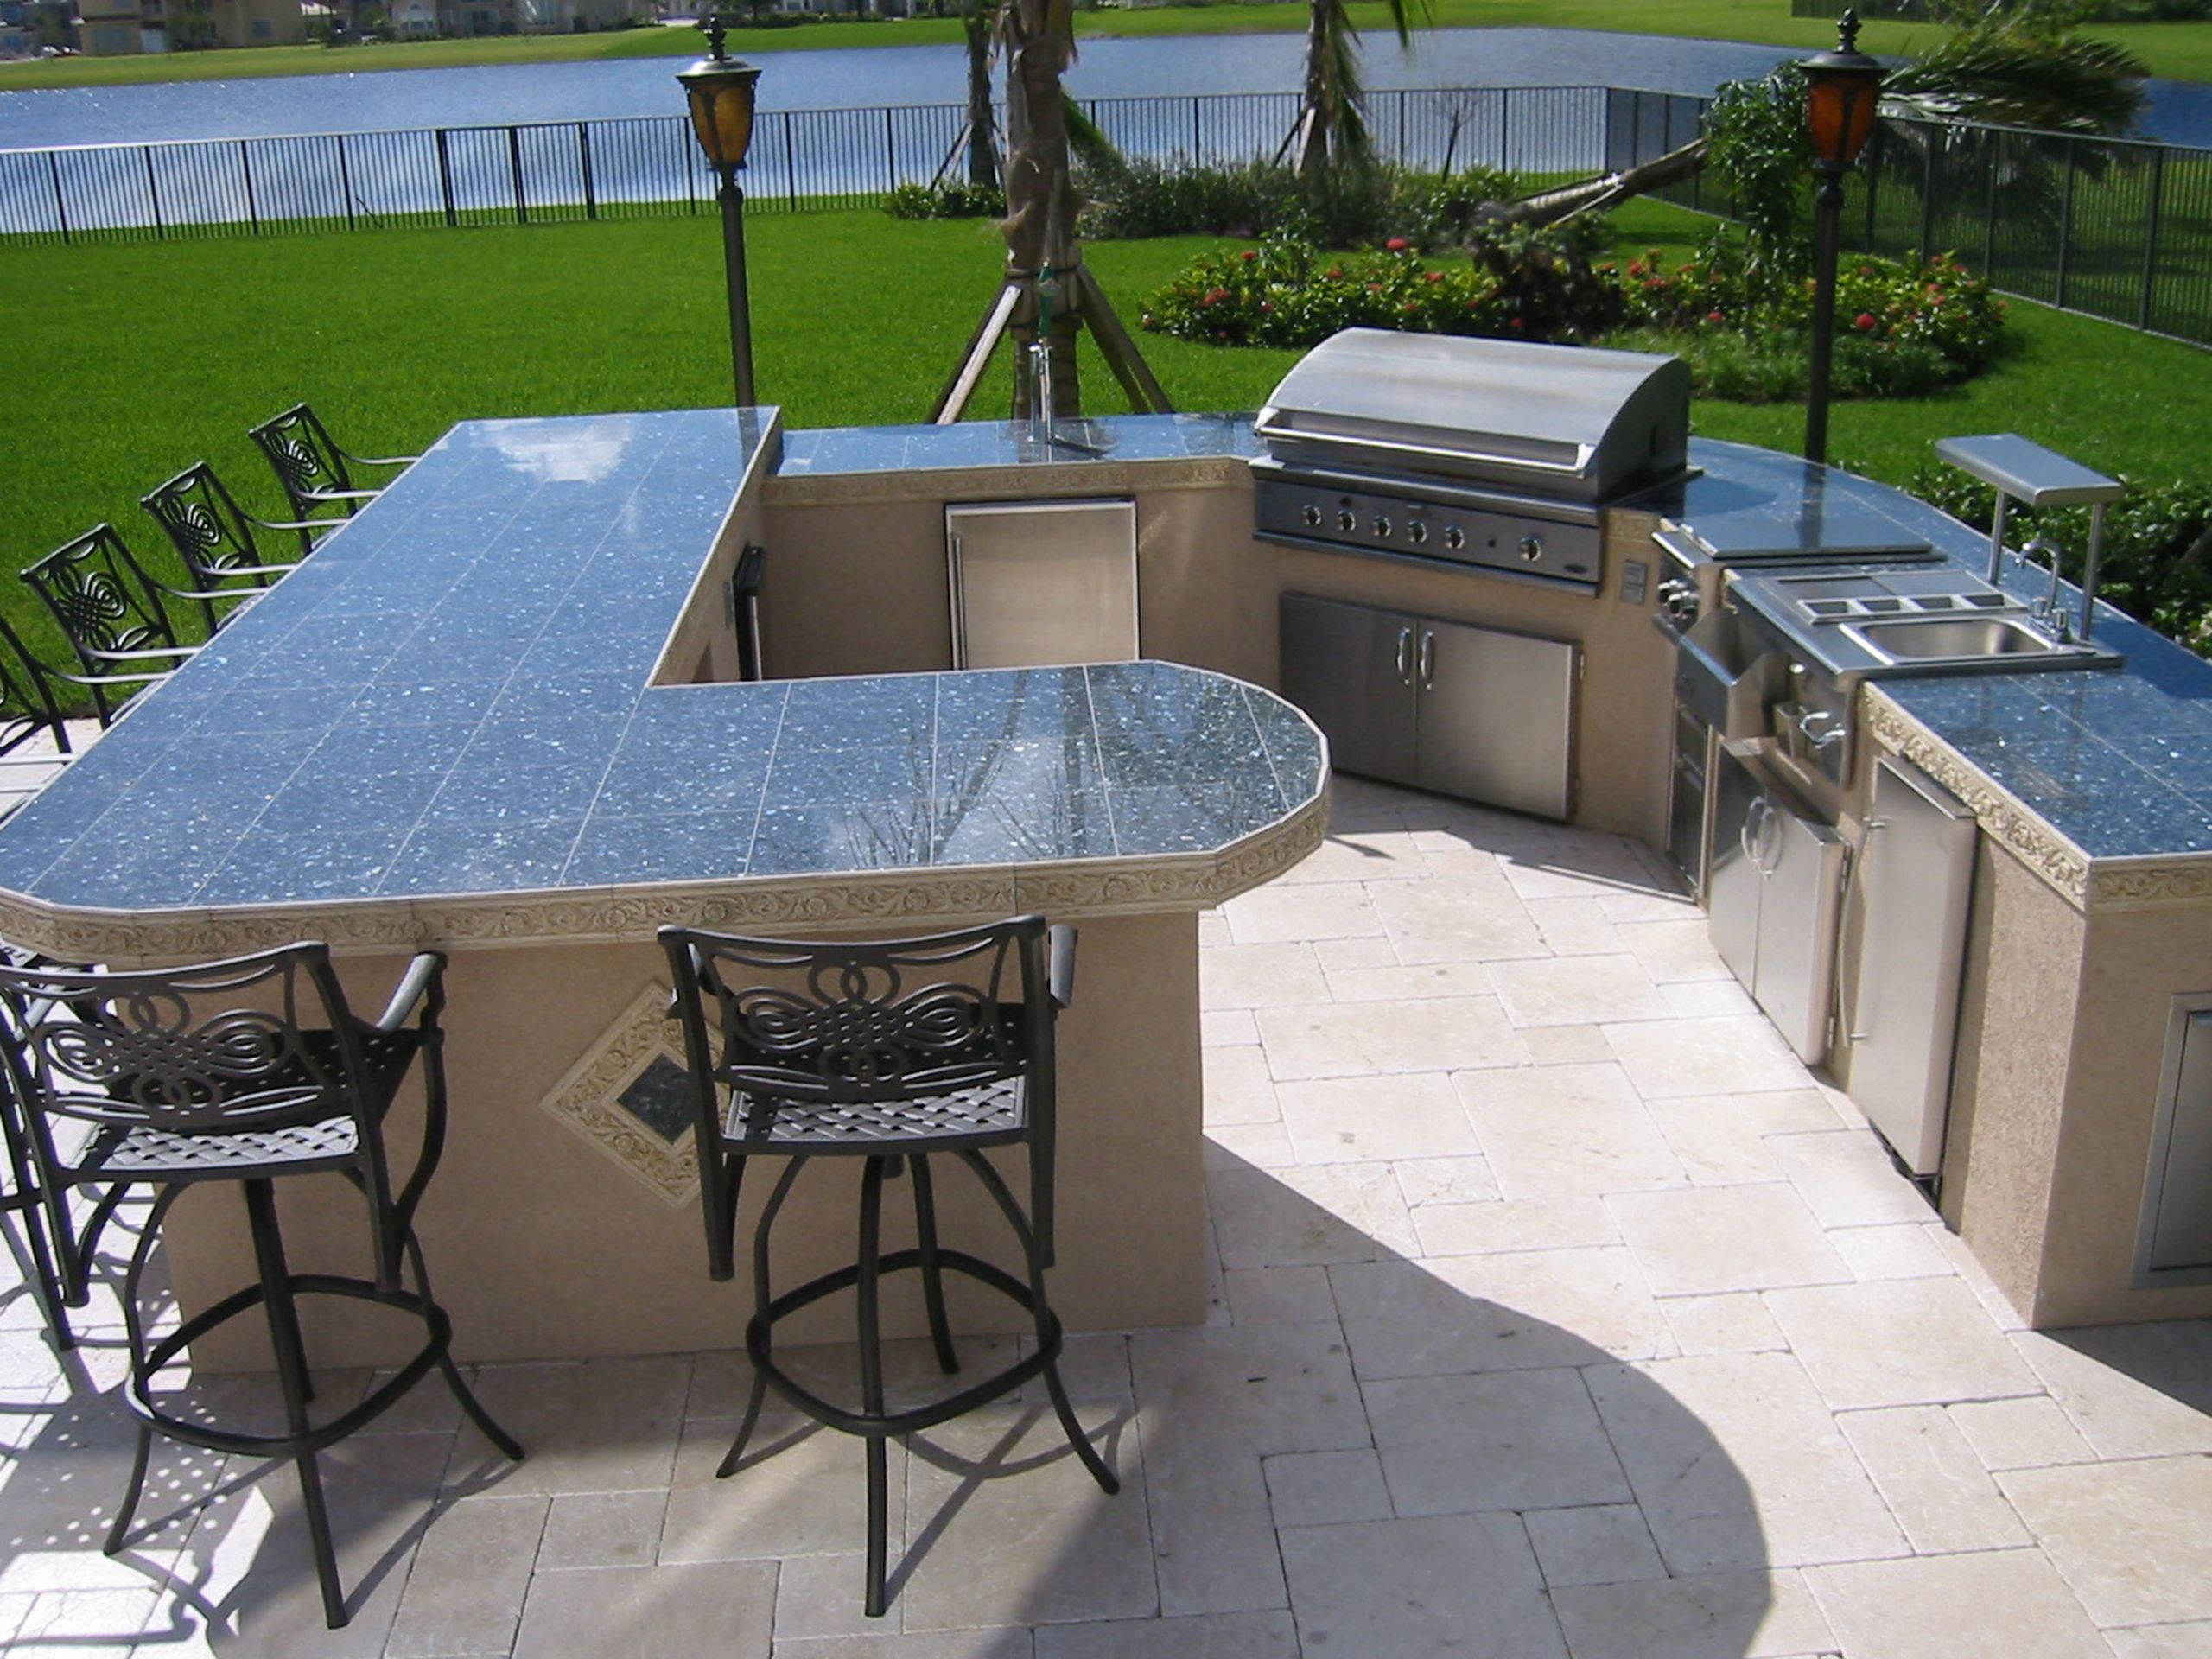 Backyard Barbecue Grill
 Outdoor Kitchen Design